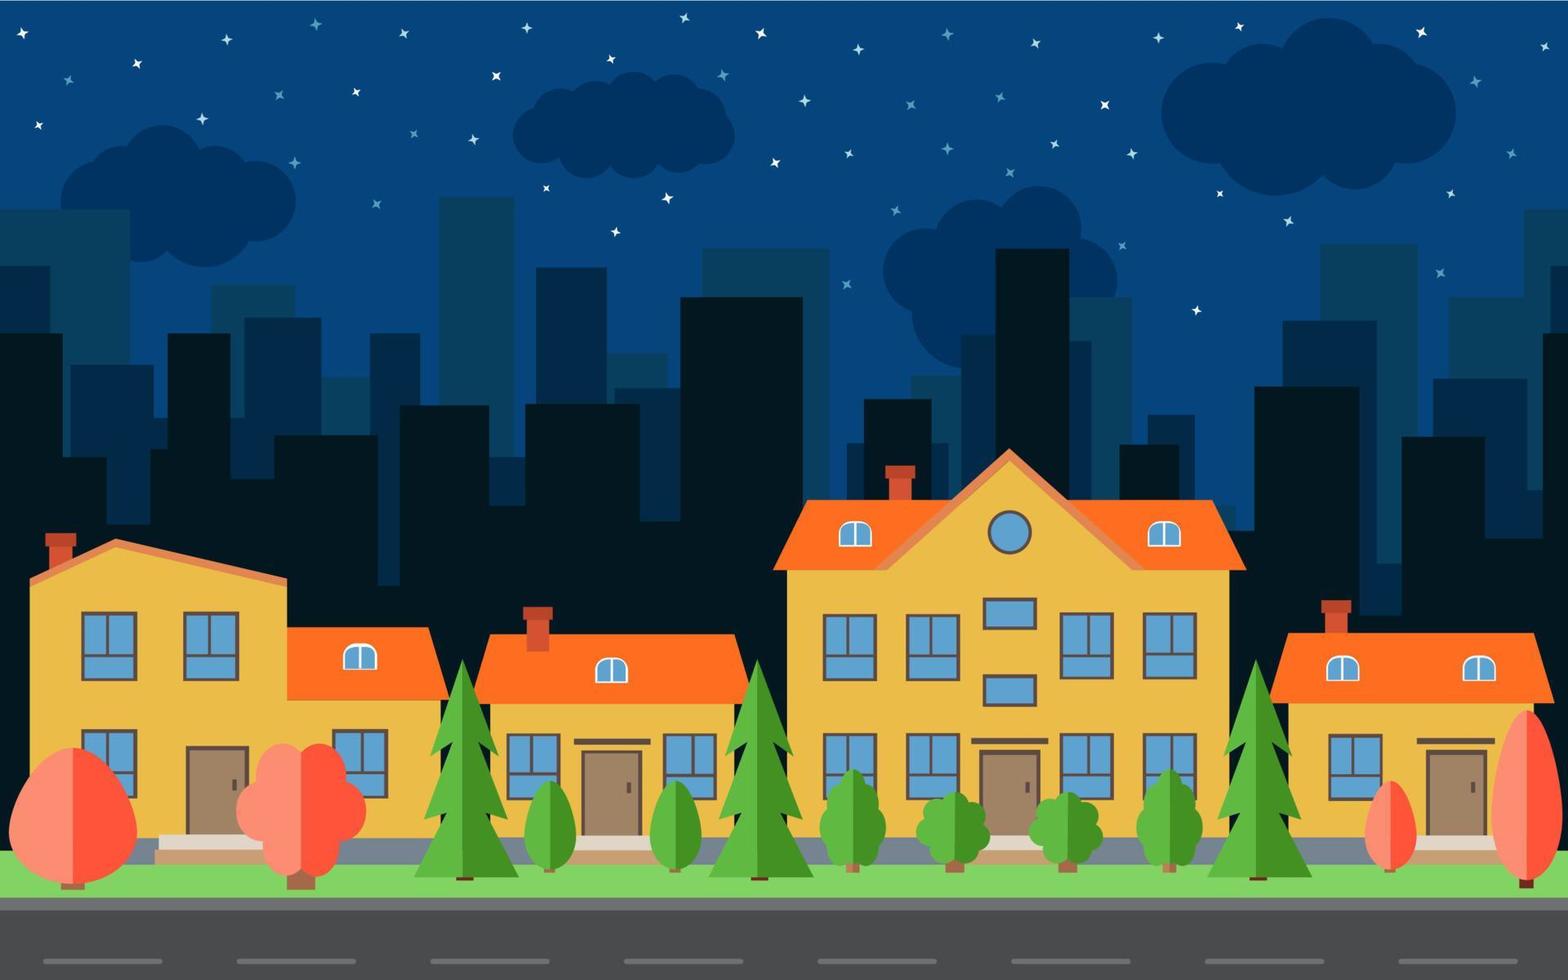 Vector night city with cartoon houses and buildings with red and green trees and shrubs. City space with road on flat style background concept. Summer urban landscape. Street view with cityscape